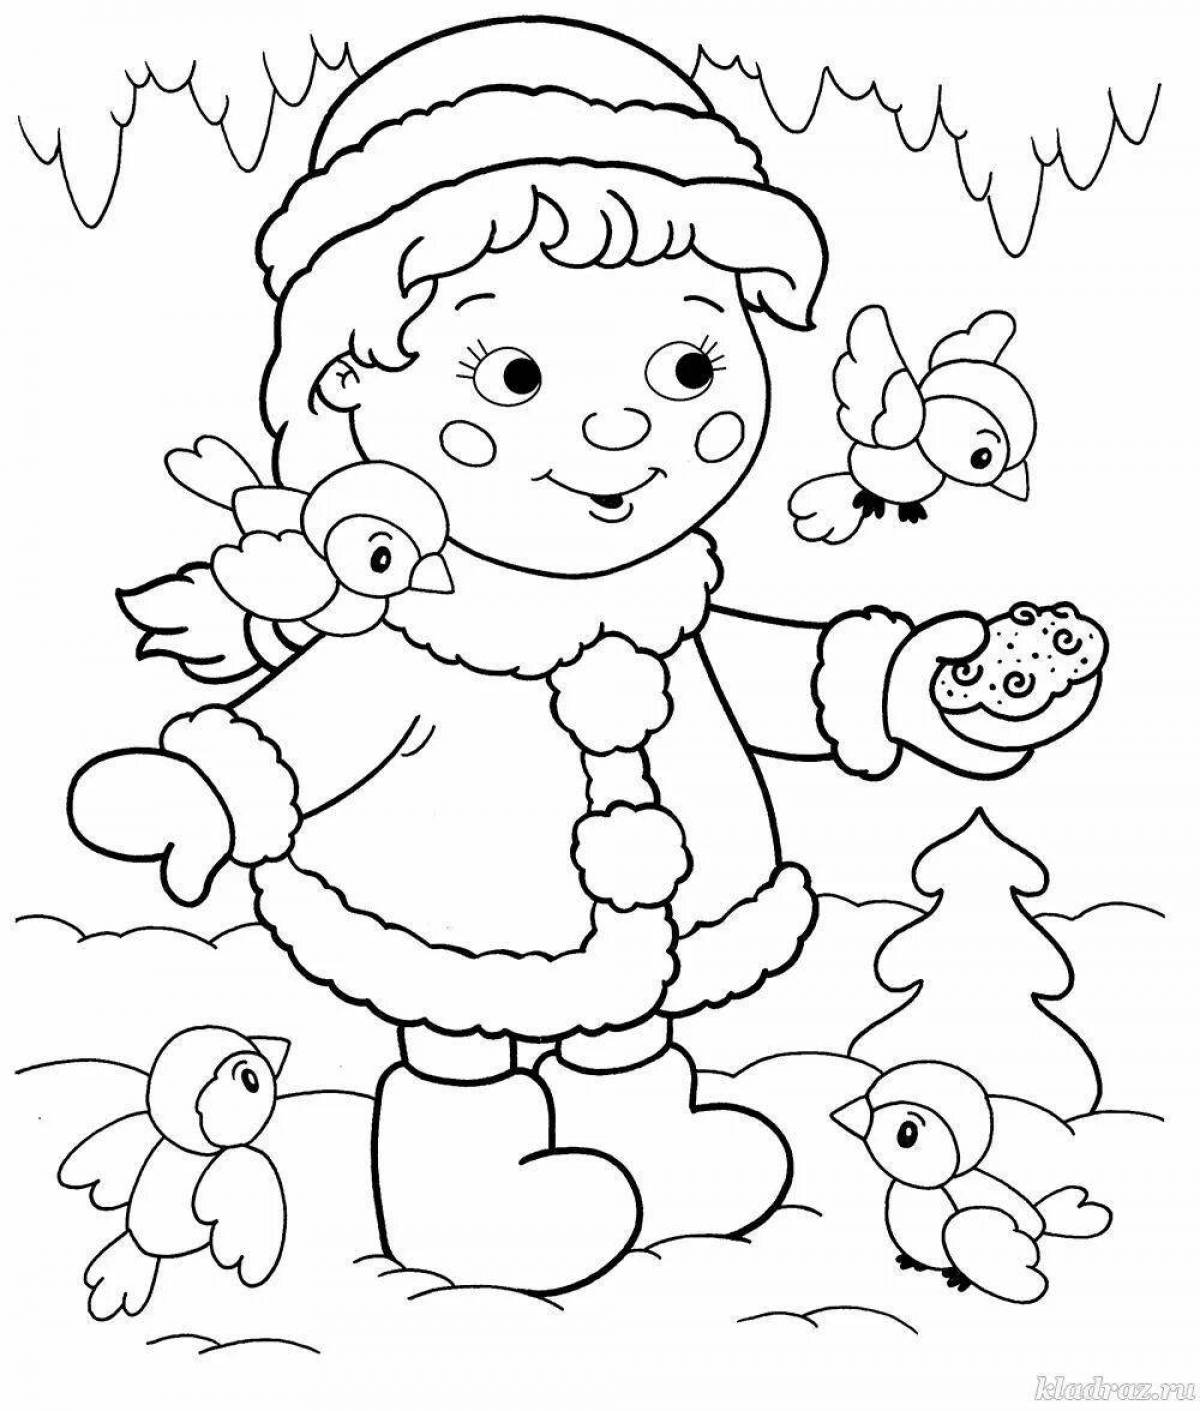 Festive Christmas coloring book for kids